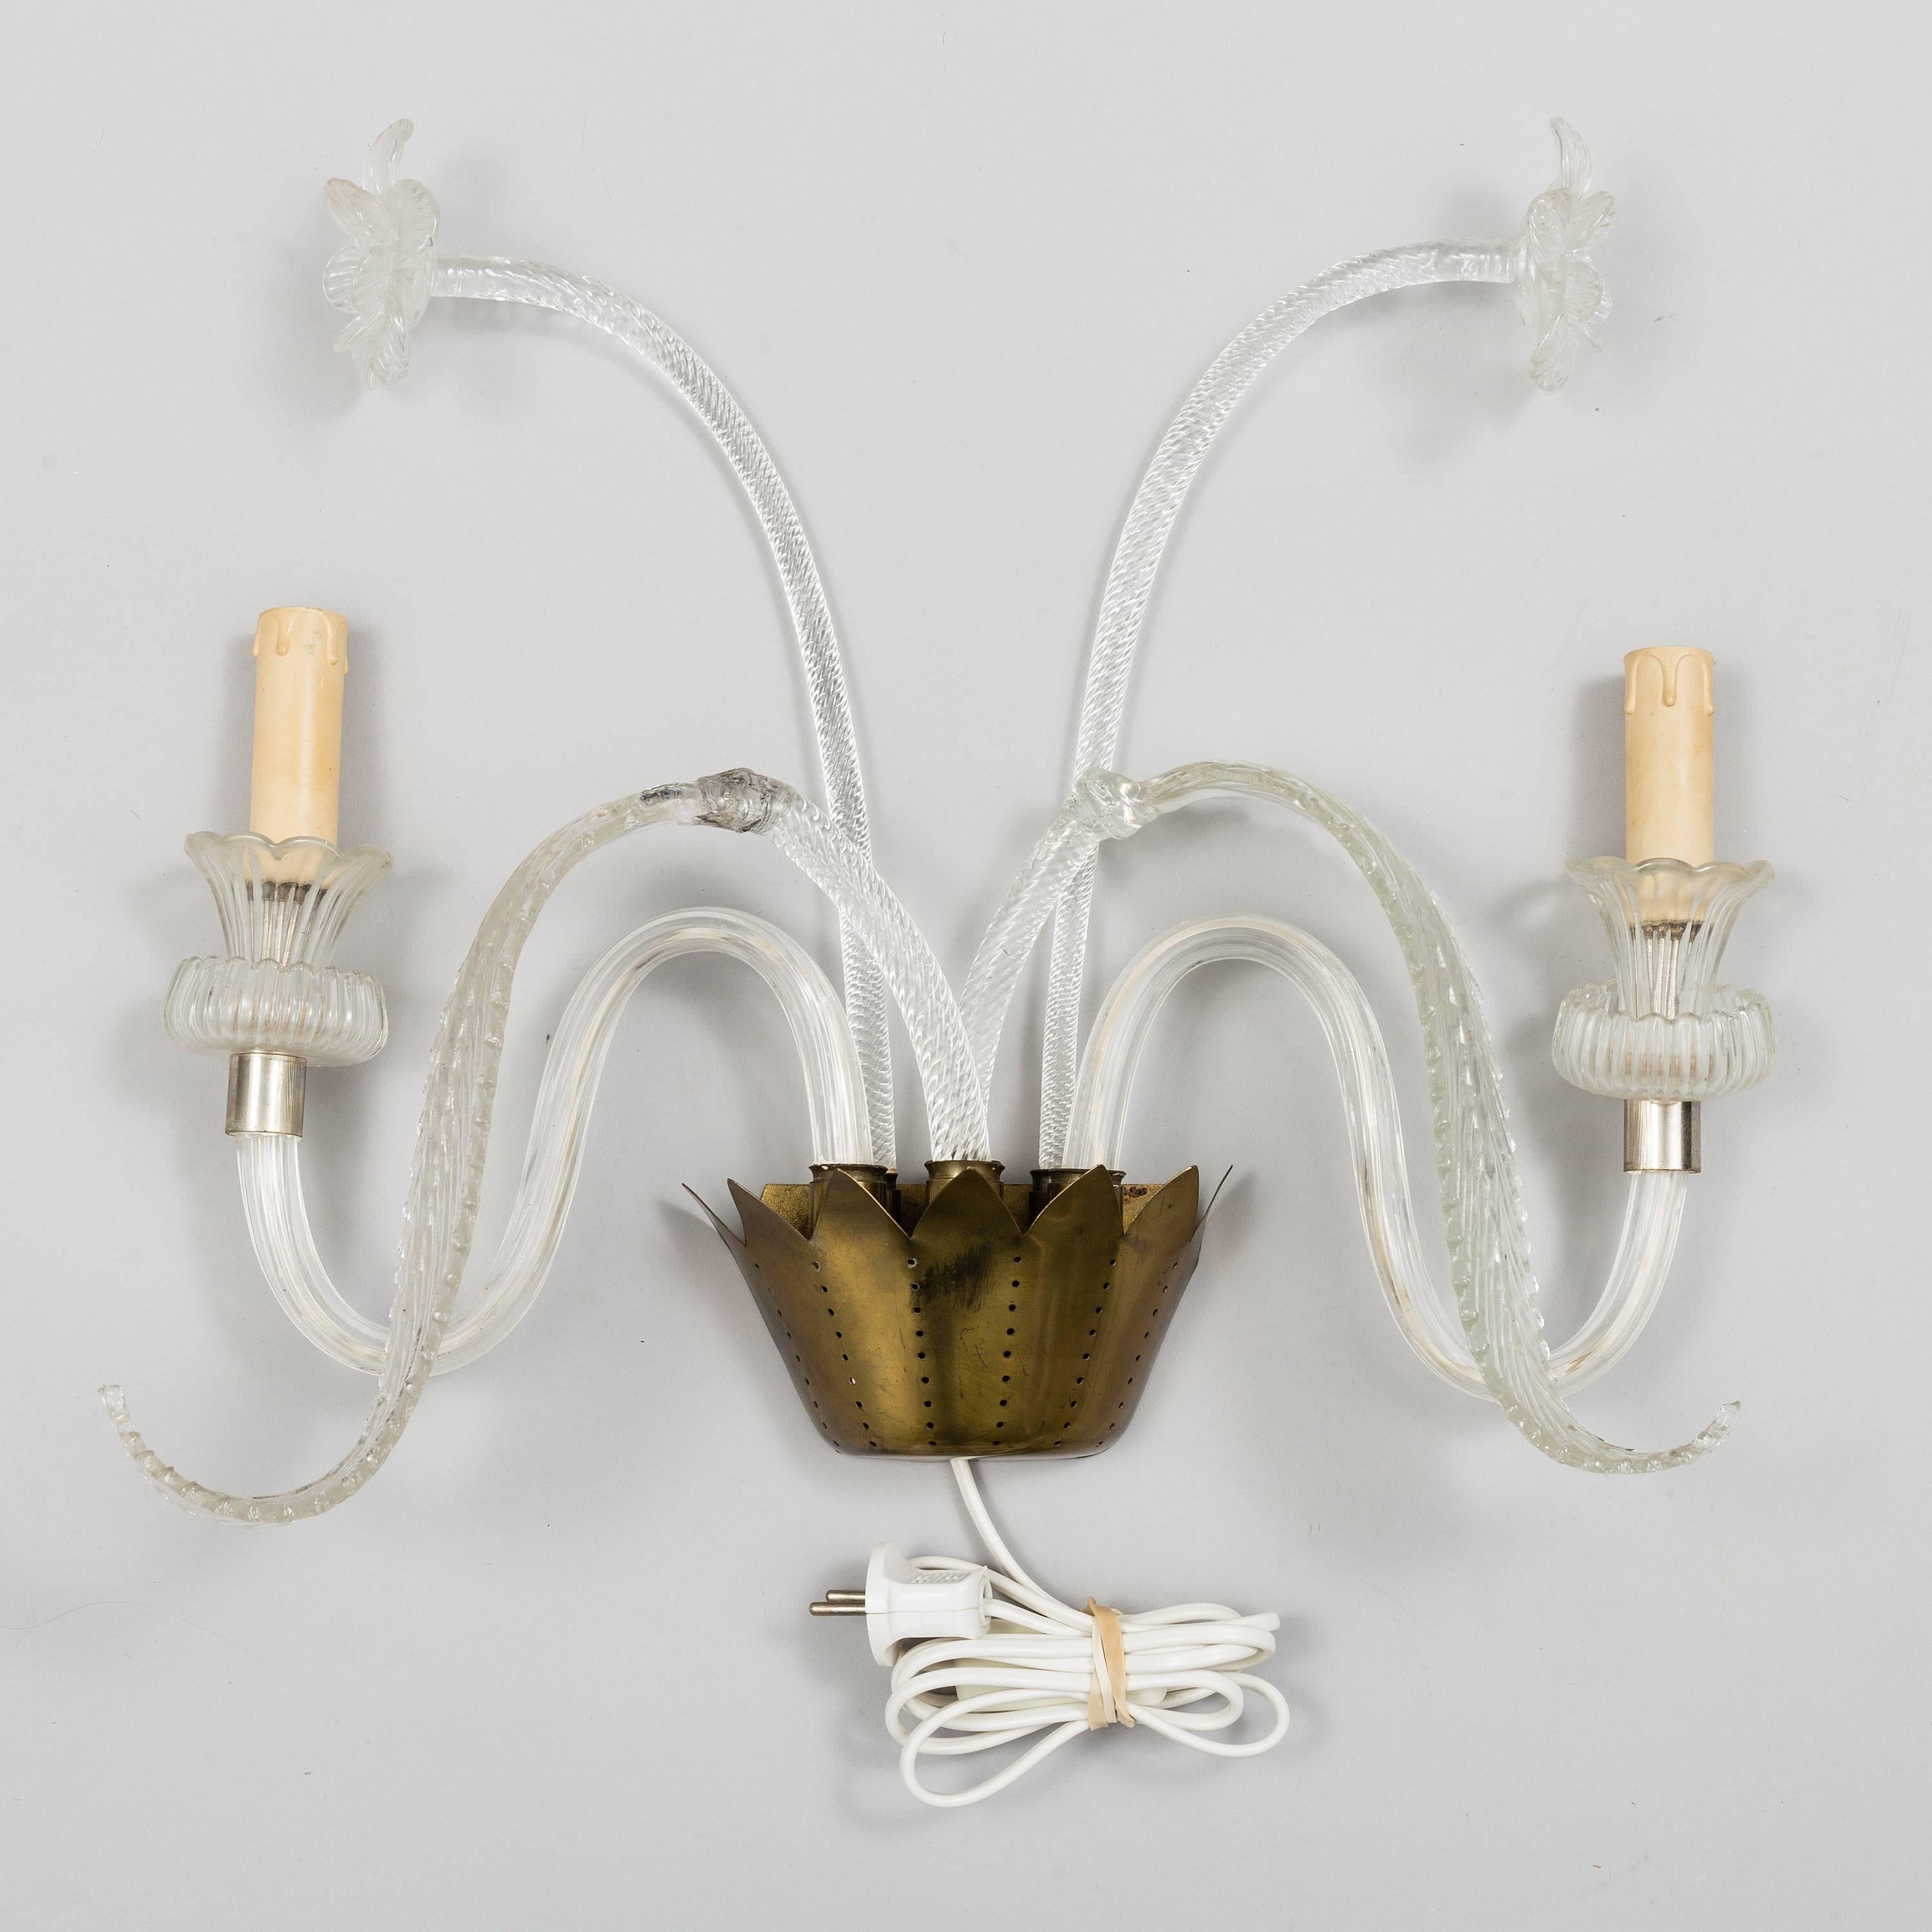 Brasse base with four glass decorative elements and two arms fitted with E14 sockets. Made in Italy in the 1950s